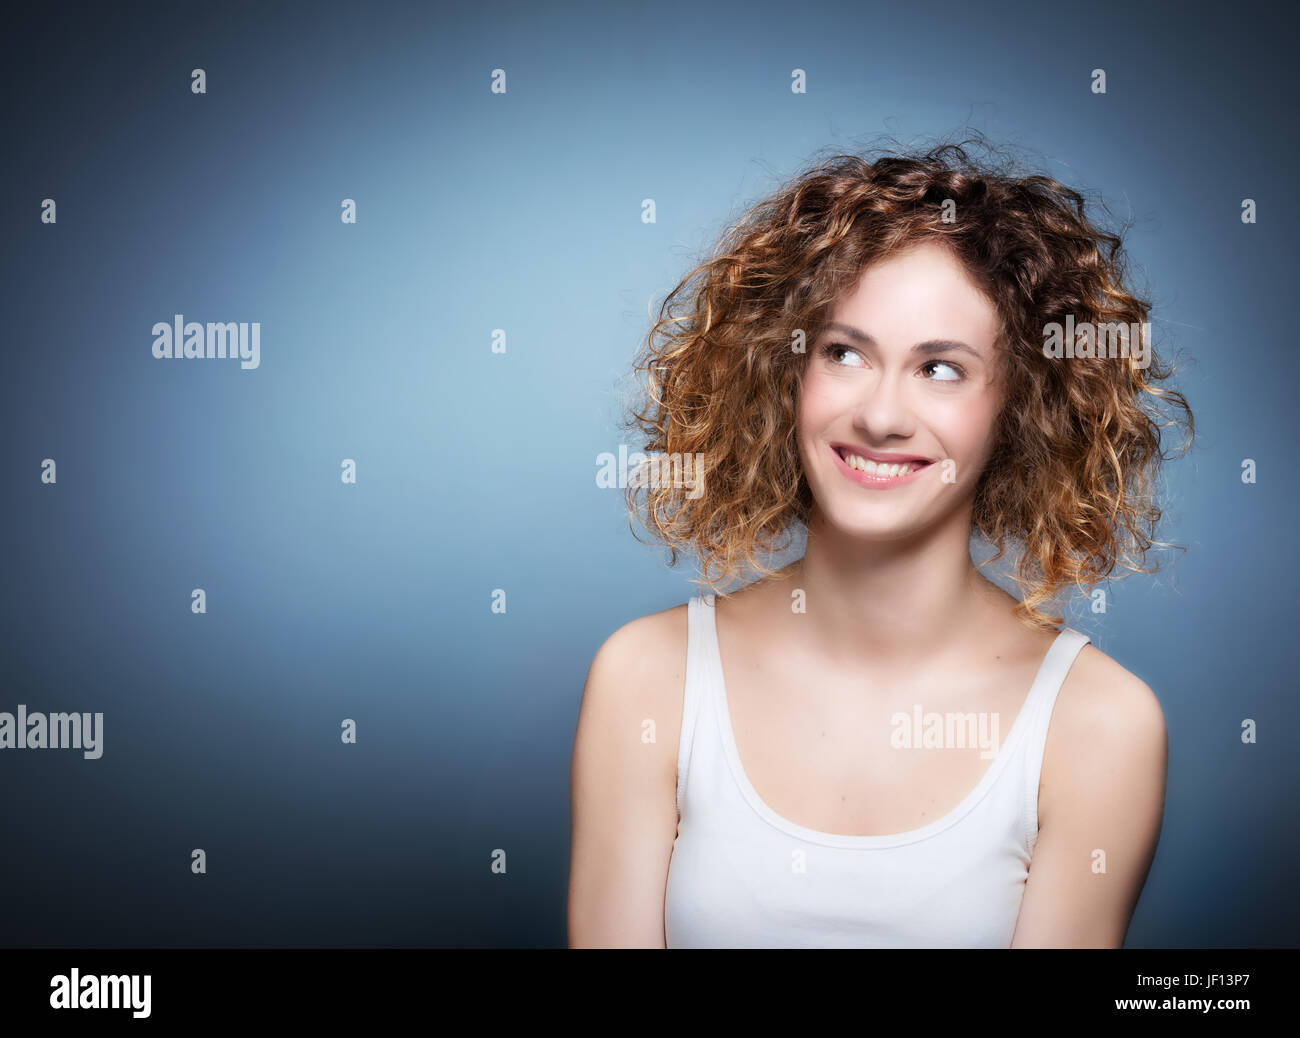 Cute, authentic girl portrait on grey and blue background. Young woman smiling, looking up. Stock Photo